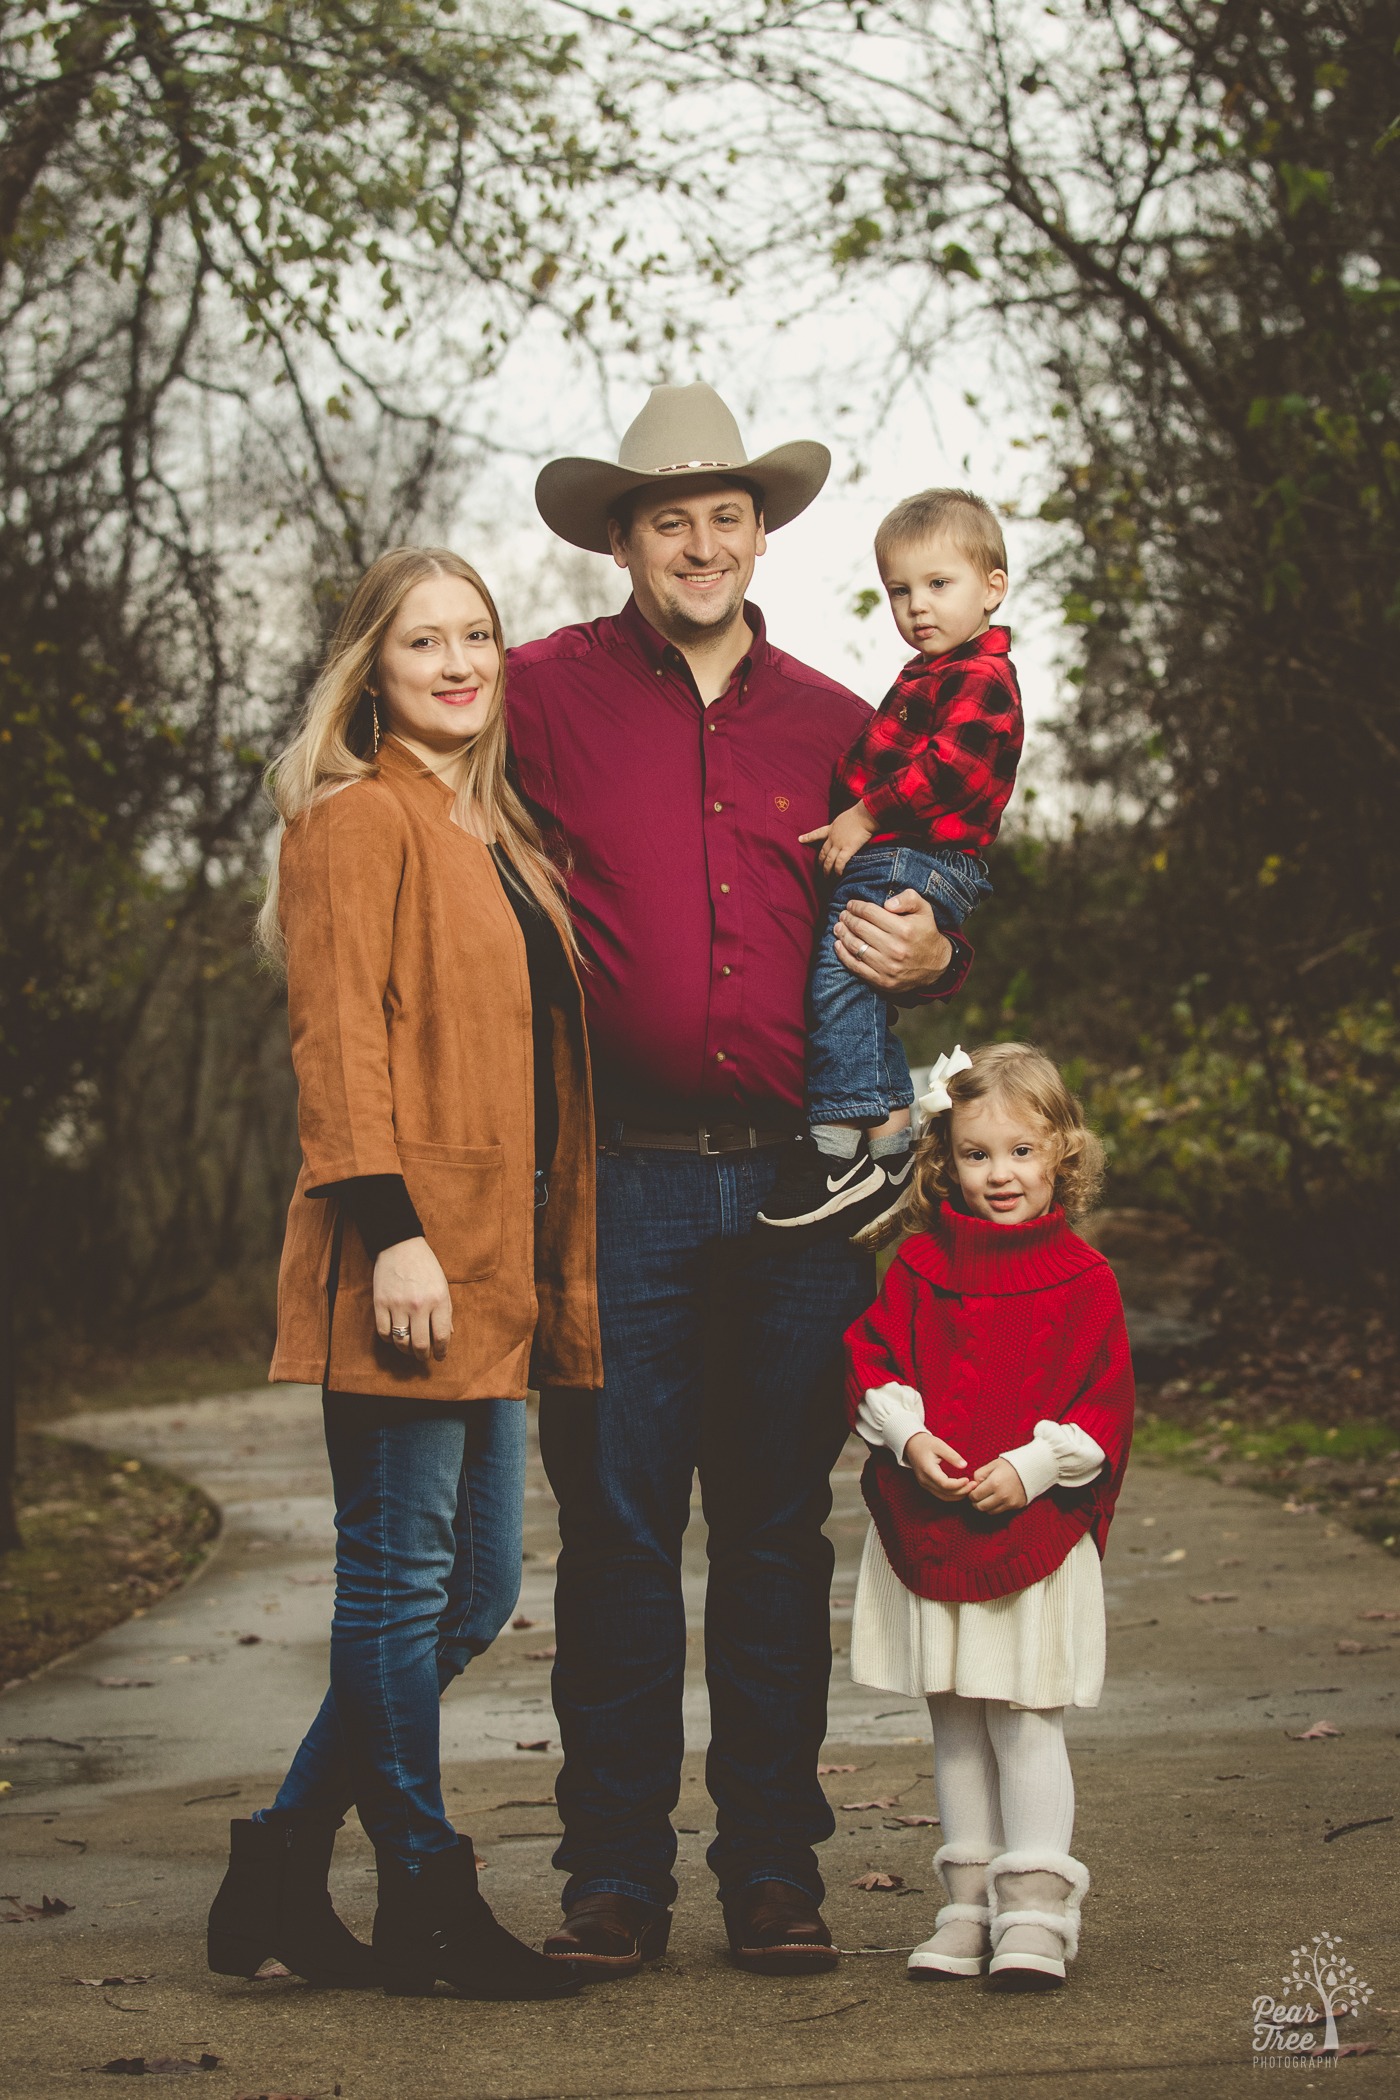 A cute family with dad wearing a cowboy hate and holding his son while standing with his wife and daughter at a park in Woodstock